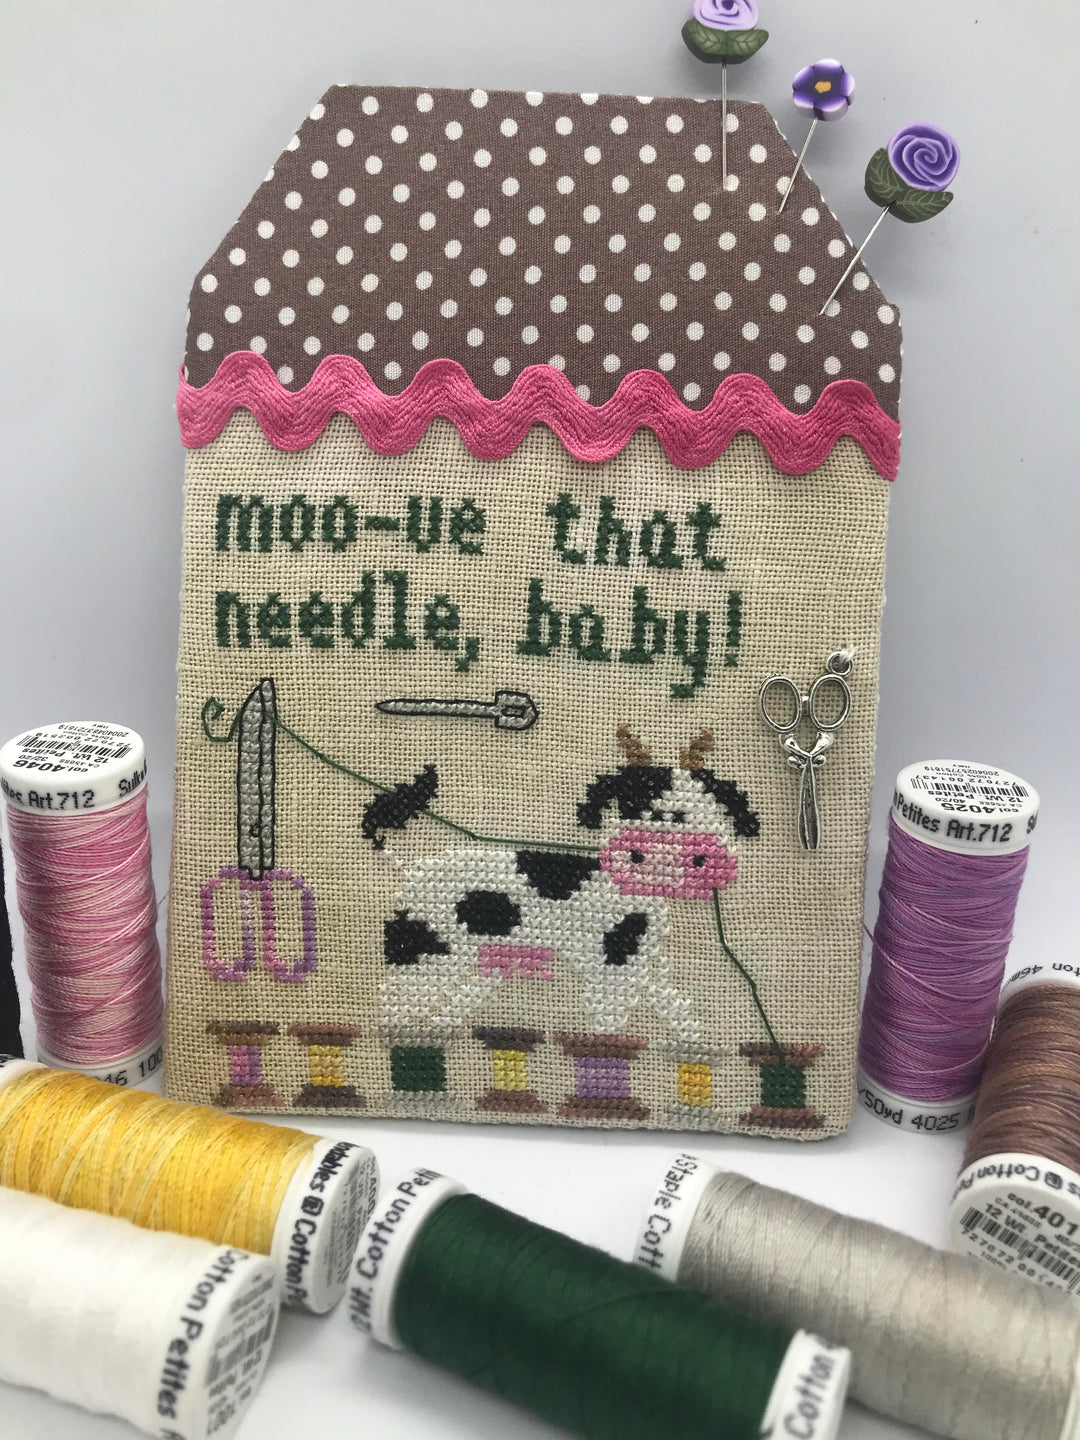 Moo-ve That Needle - The Moo the Merrier | Romy's Creations